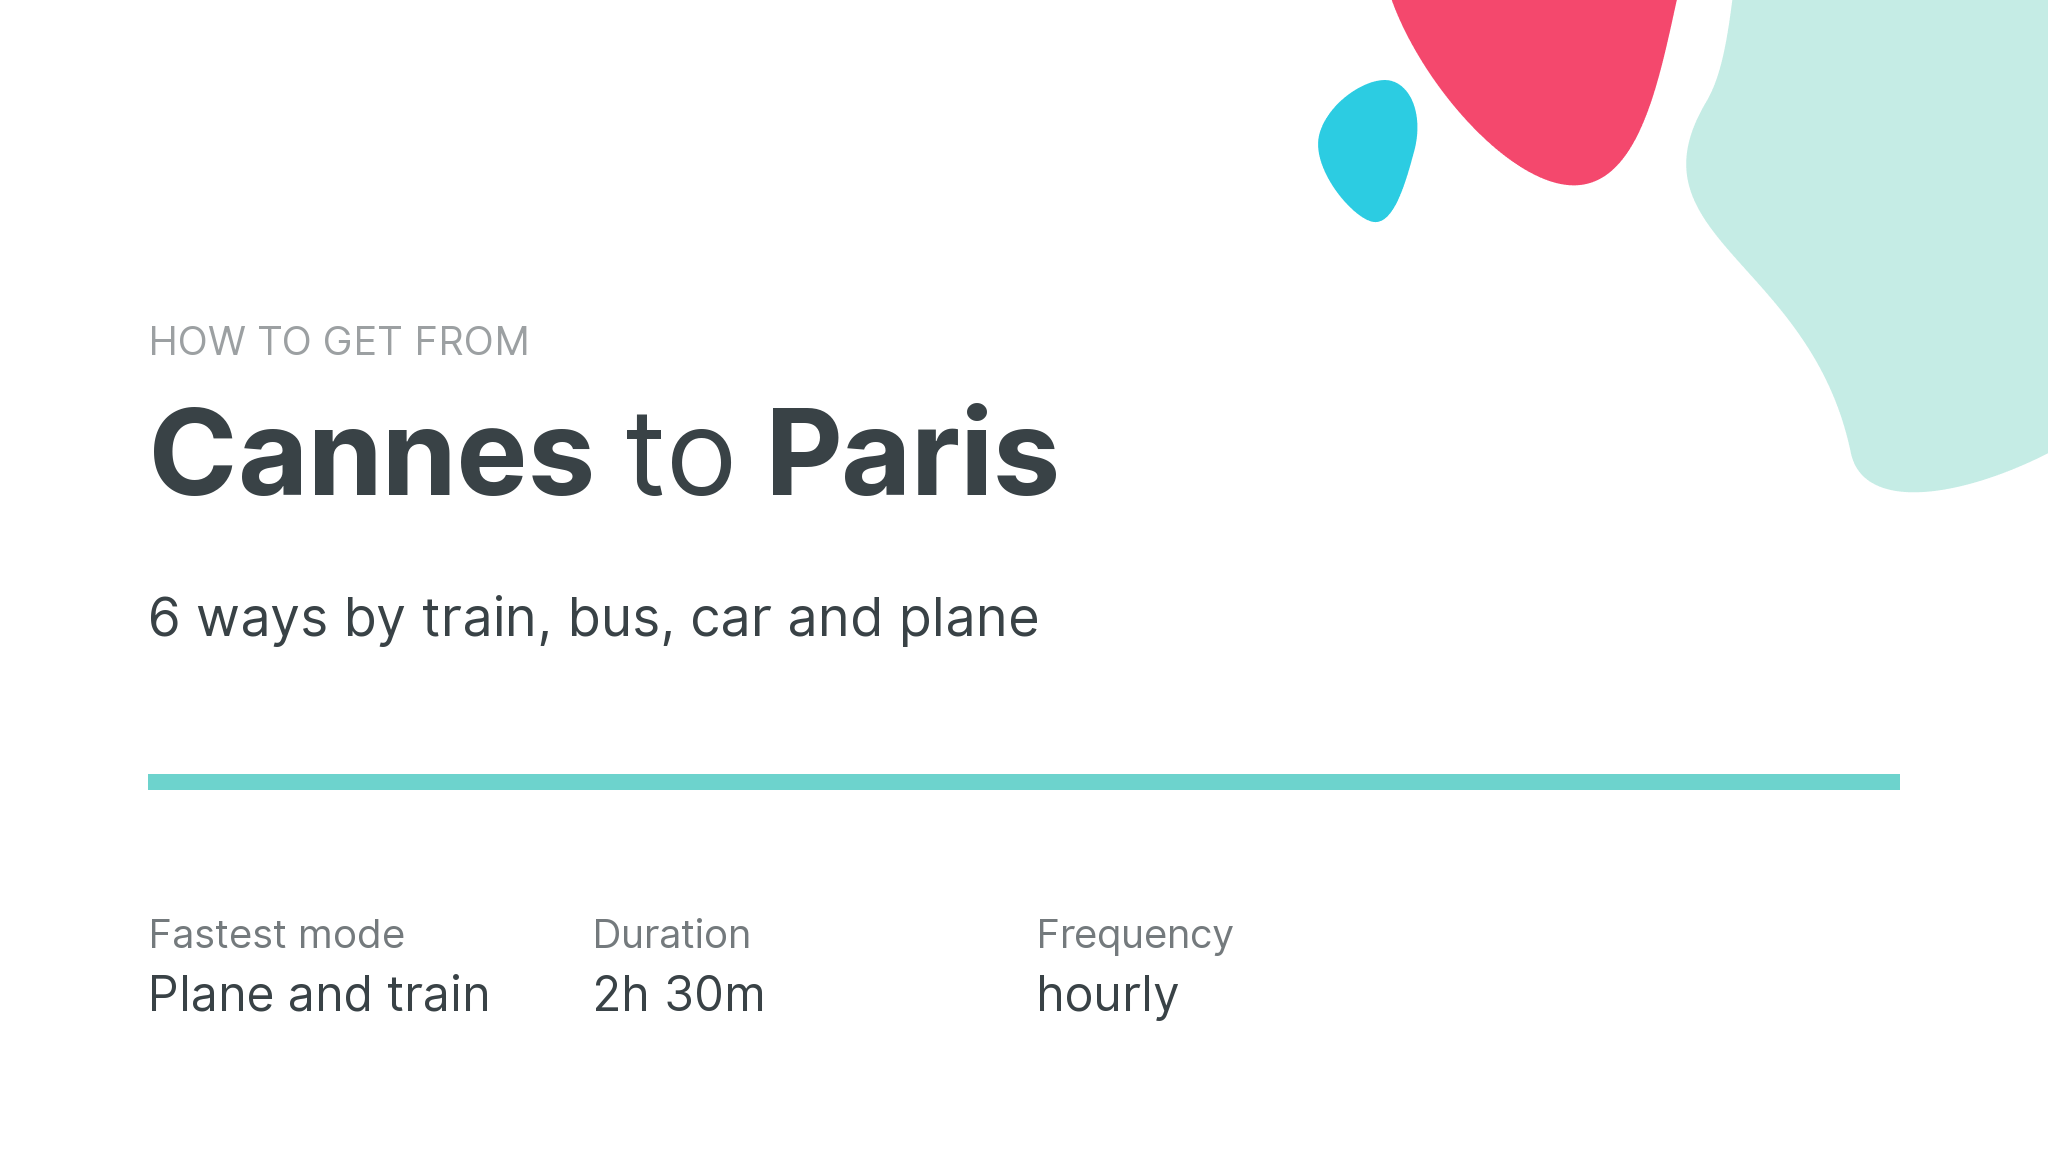 How do I get from Cannes to Paris